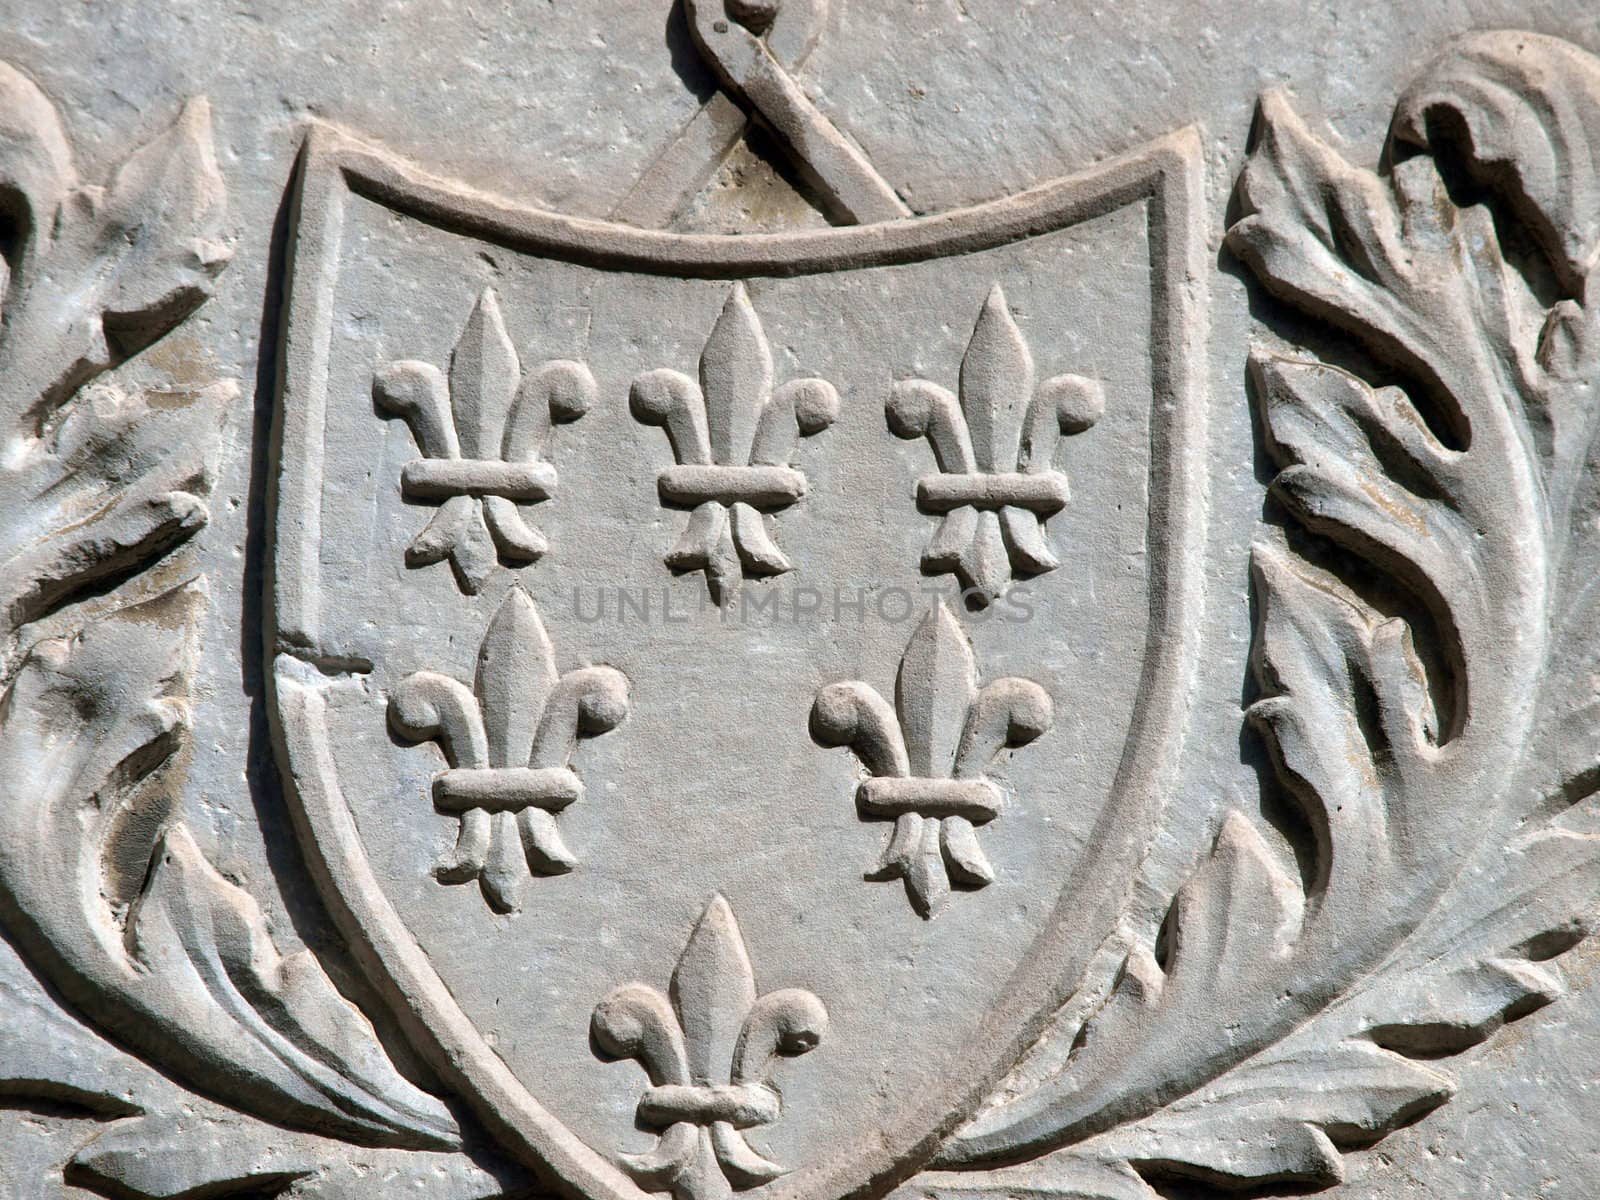 Tuscany - one of many signs of heraldic